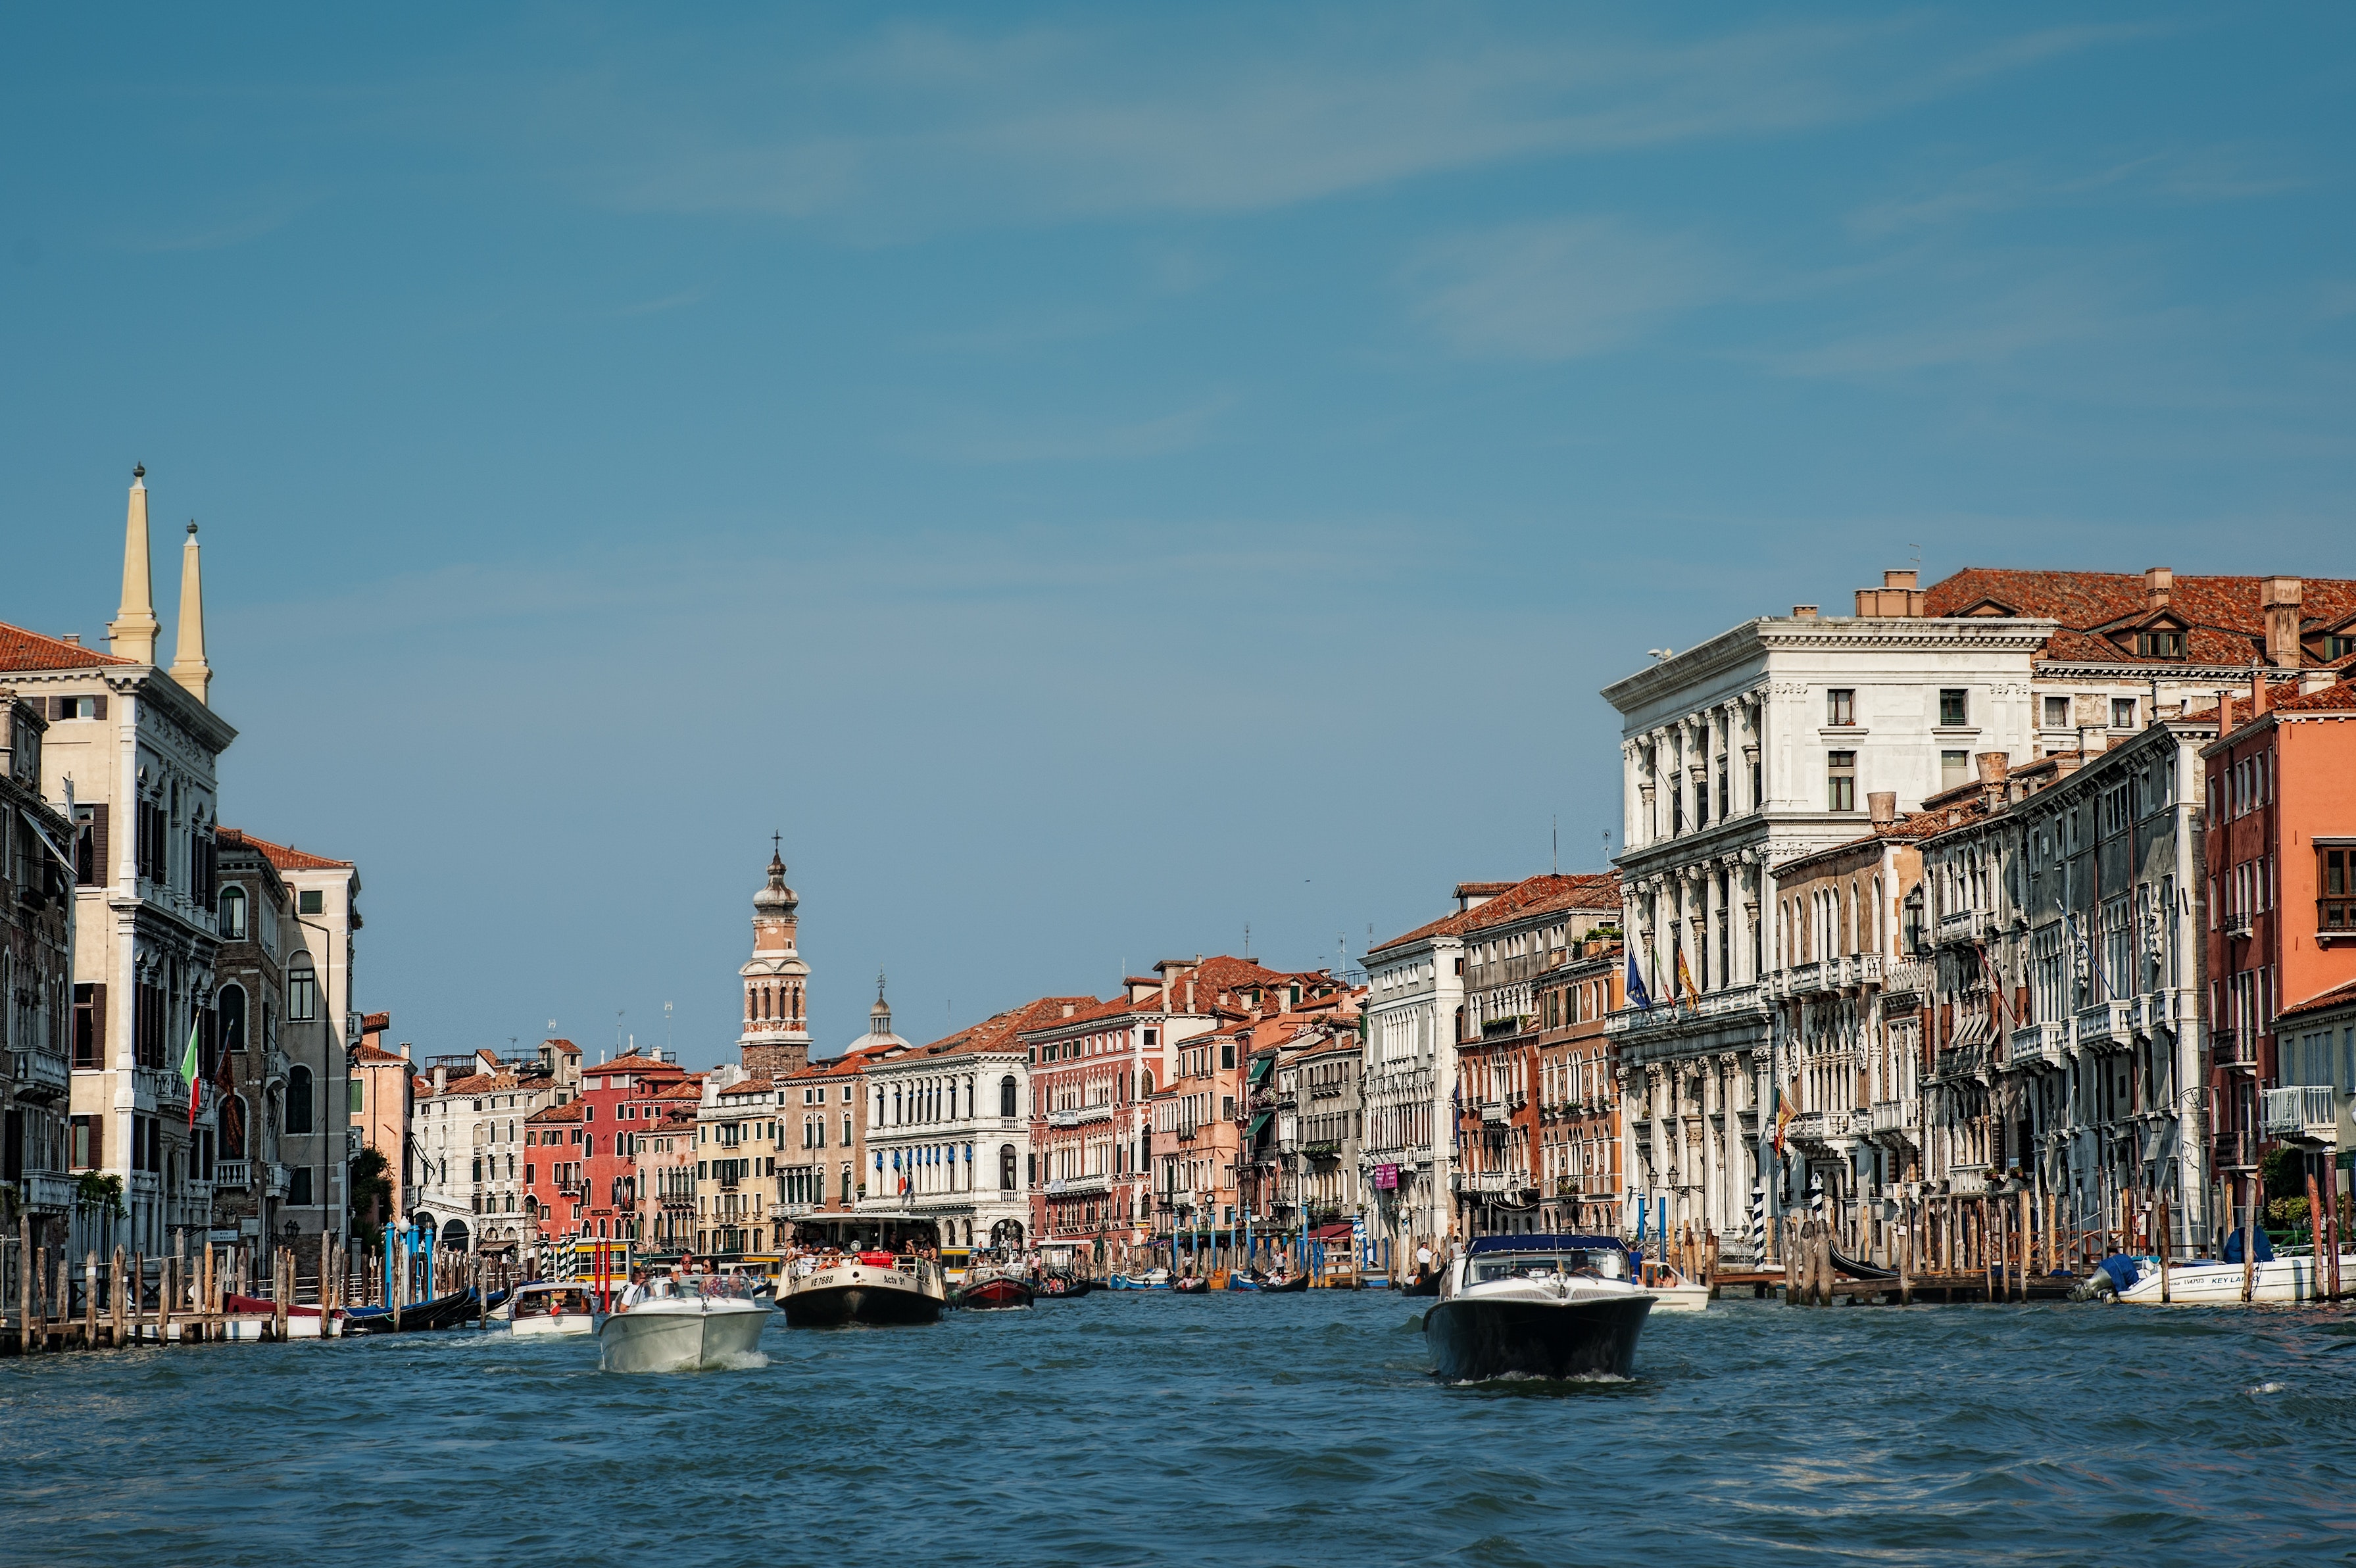 Students: a new opportunity for Venice